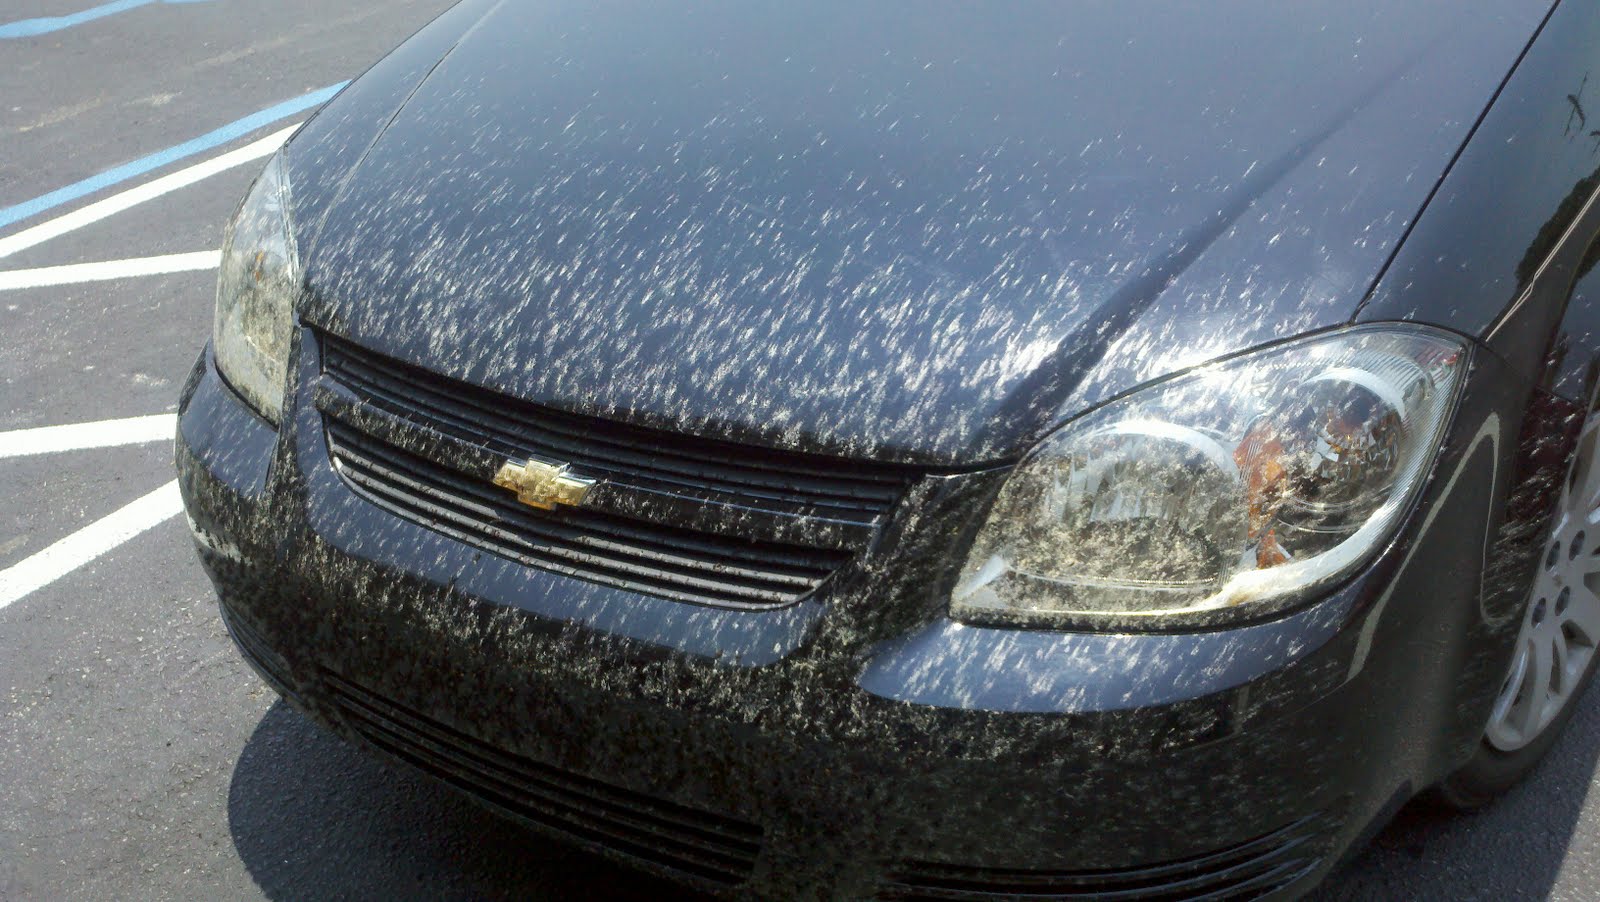 Learn effective strategies to protect your car from lovebugs and maintaining your vehicle's paint job in peak condition.